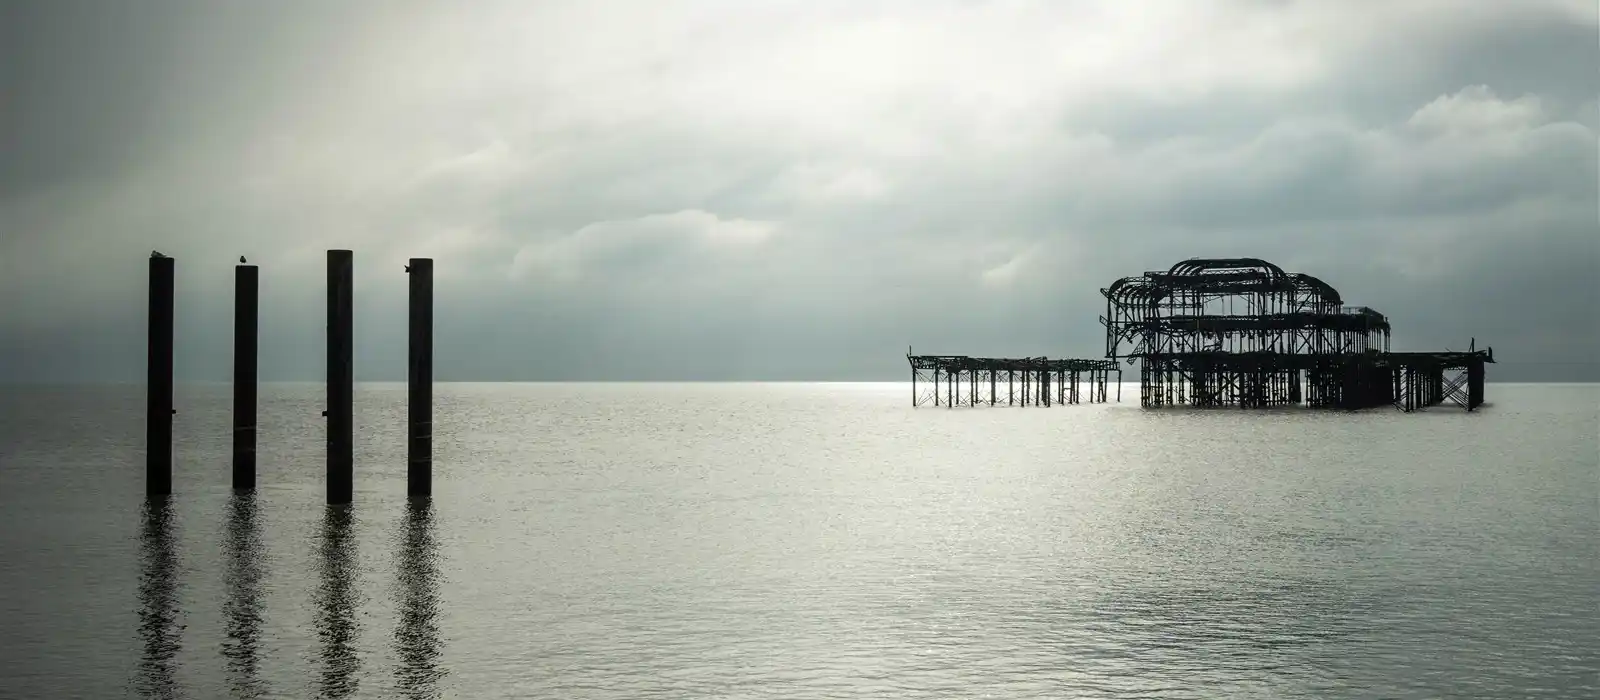 The remains of West Pier, Brighton